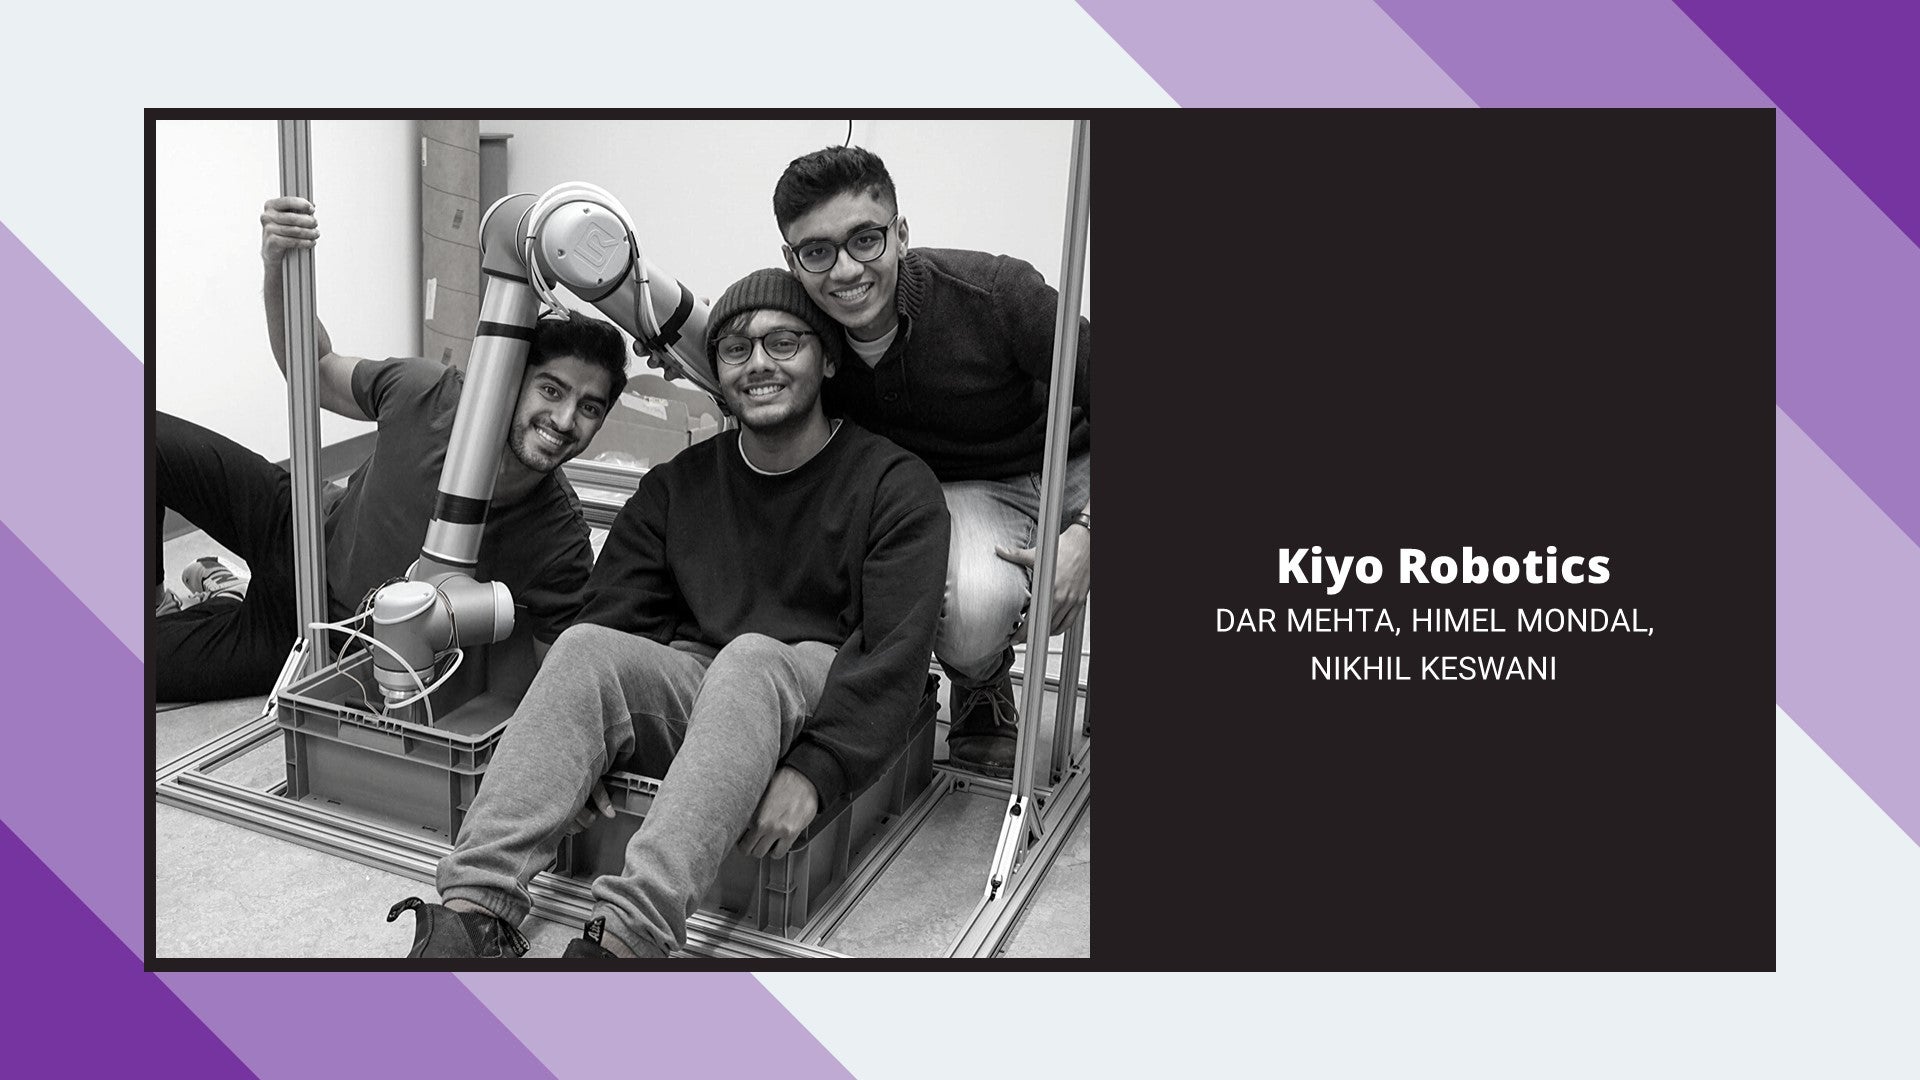 Kiyo Robotics is building a fully autonomous solution for piece picking in ecommerce order fulfillment and kitting processes.